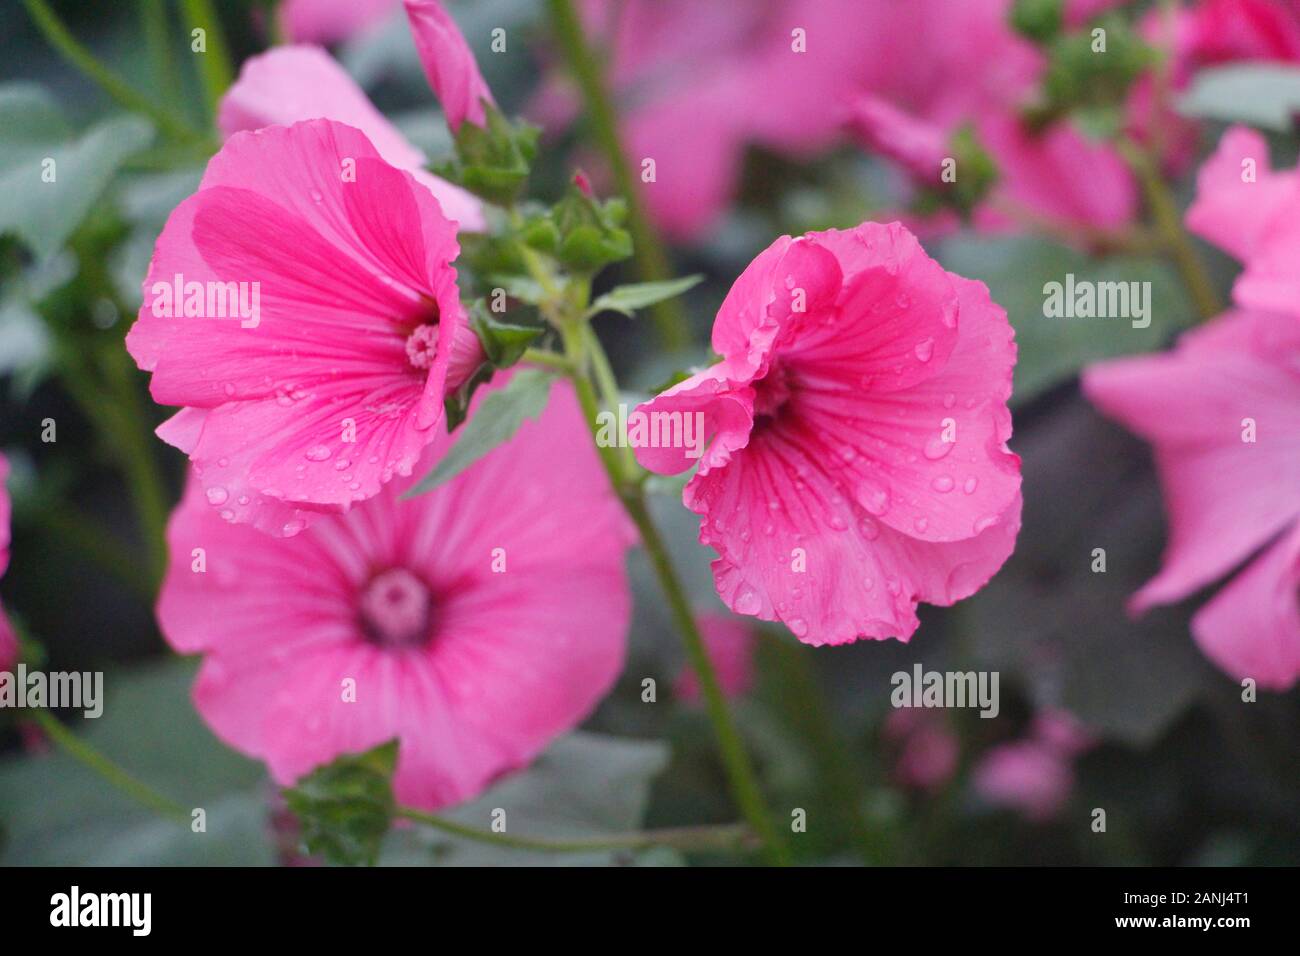 Beautiful flowers of pink Rosa Mallow or Lavatera trimestris. Tender pink flowers on a background of green leaves. Annual, pink, royal or regal mallow Stock Photo